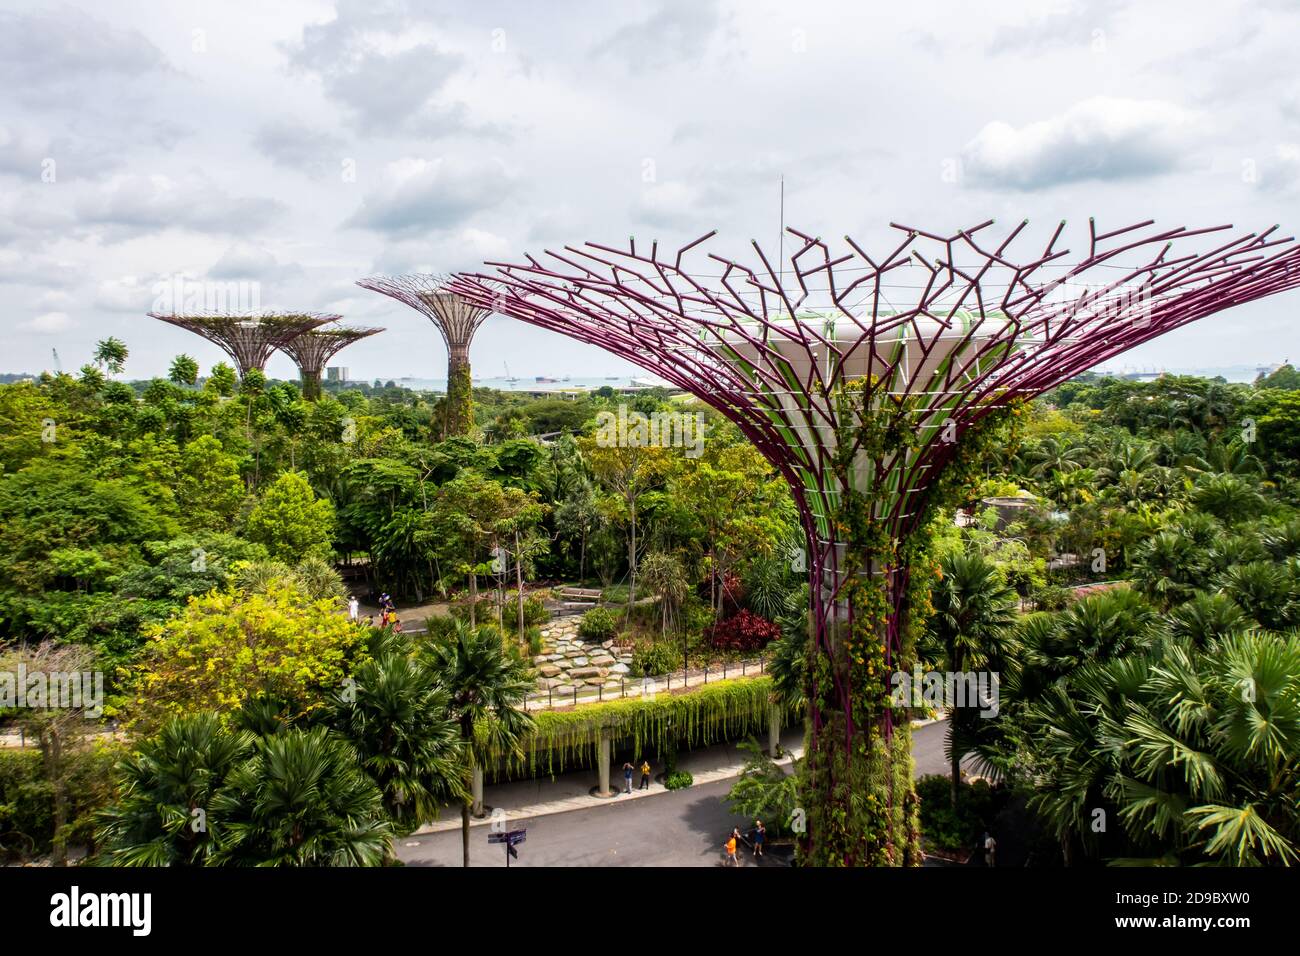 Singapore, 22/01/19. Landscape view of Gardens by the Bay park with Supertree Grove constructions and green trees and plants below, seen from OCBC Sky Stock Photo